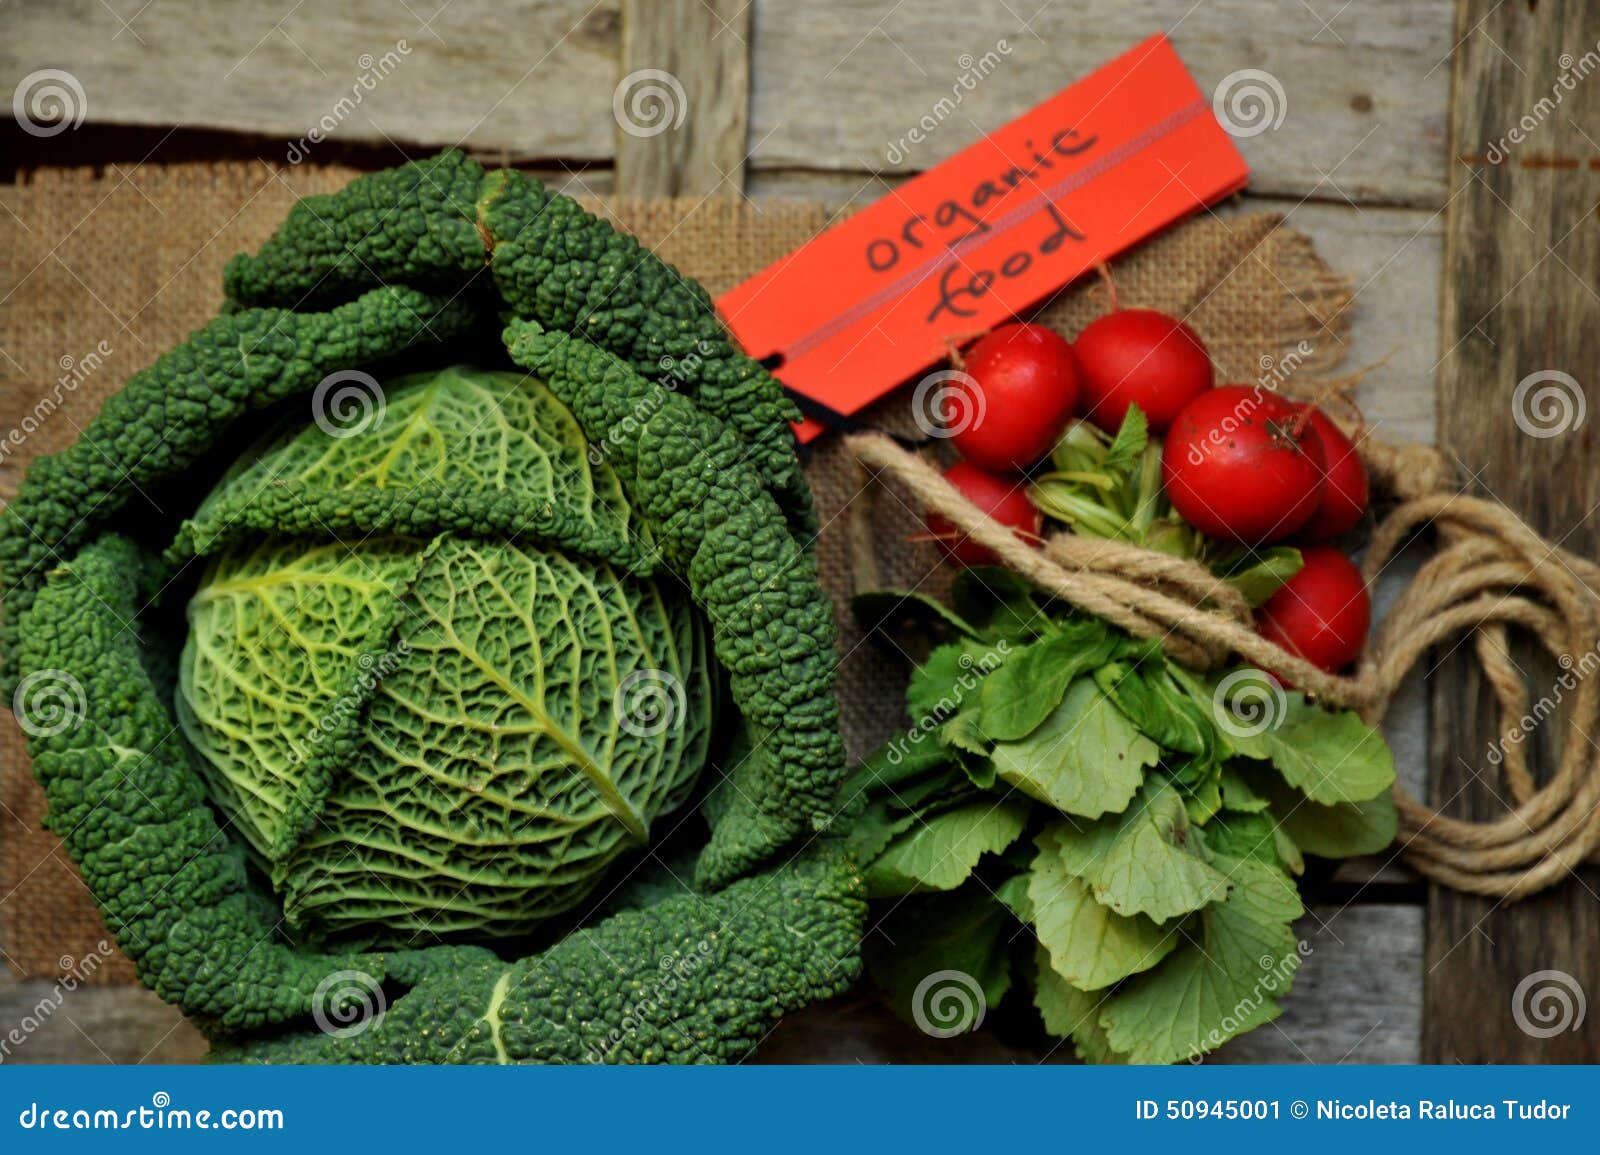 organic vegetables : green cabbage and radish on a wooden board